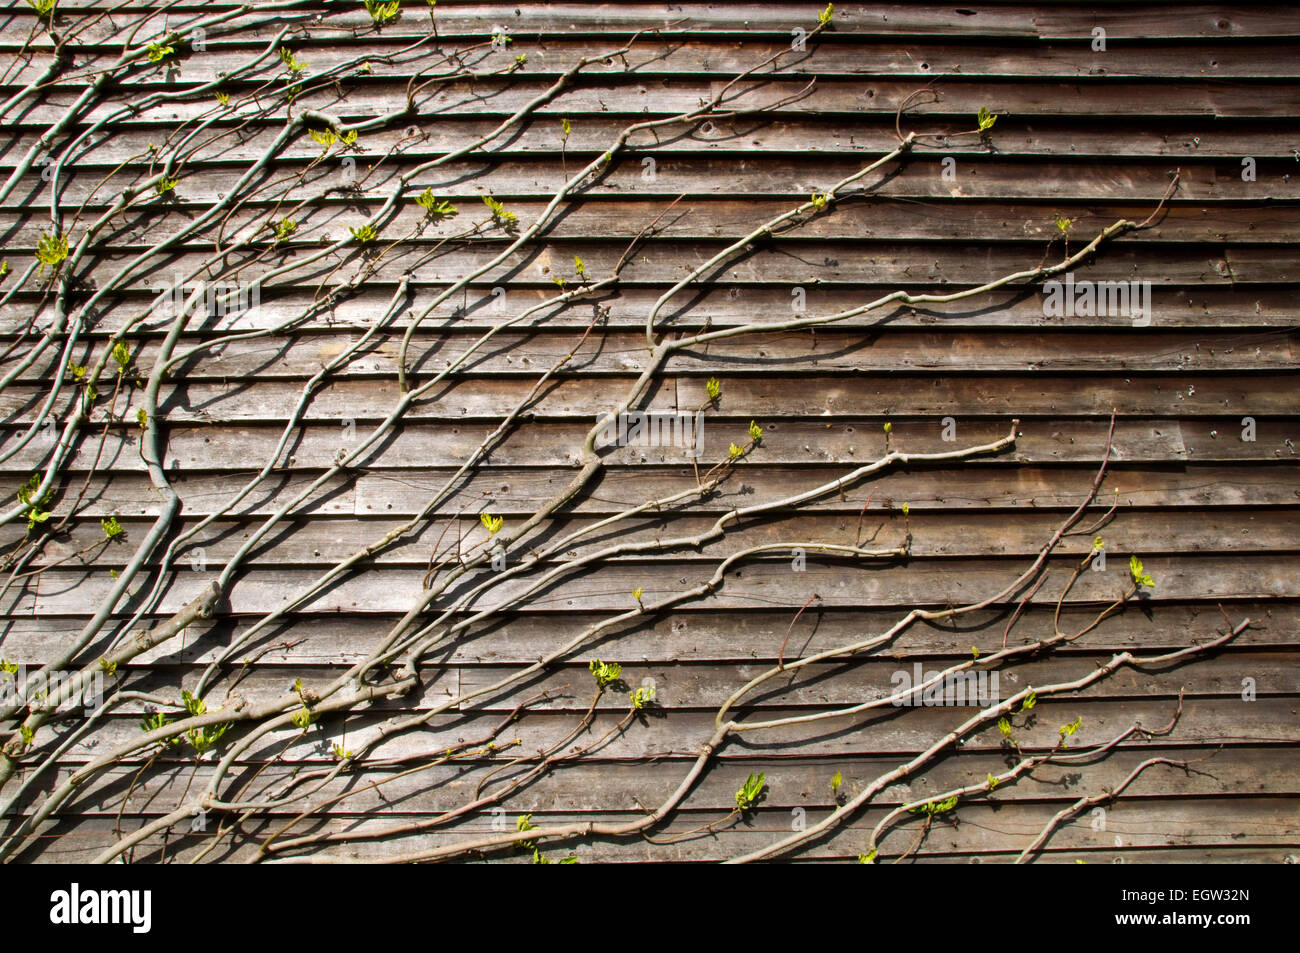 Green shoots on a creeping vine against a wood panelled wall Stock Photo